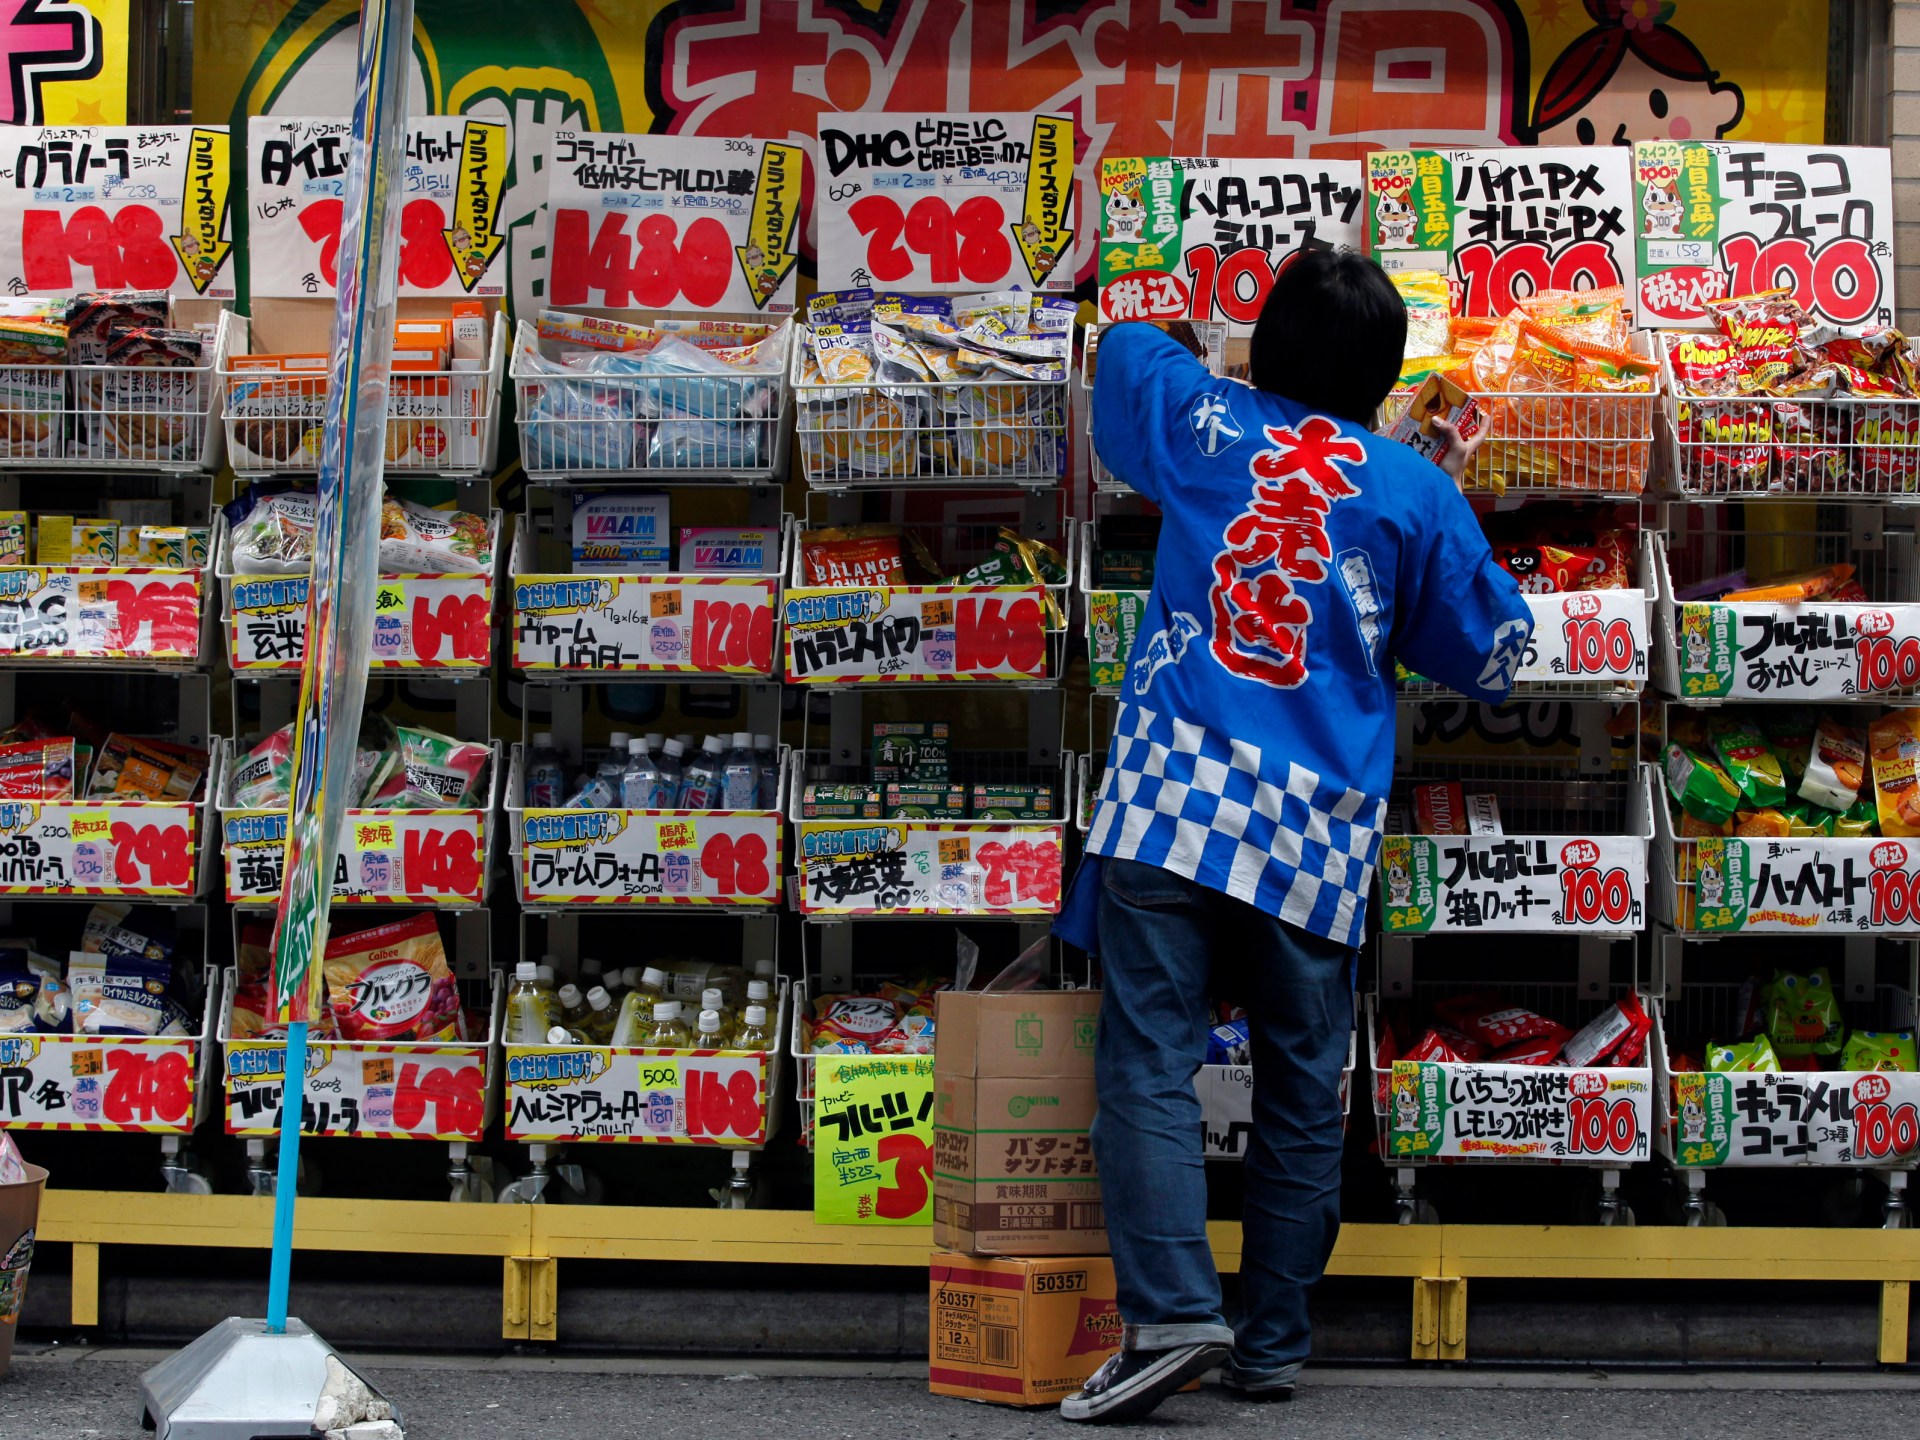 Japan upgrades Q3 GDP as international recession, COVID dangers linger